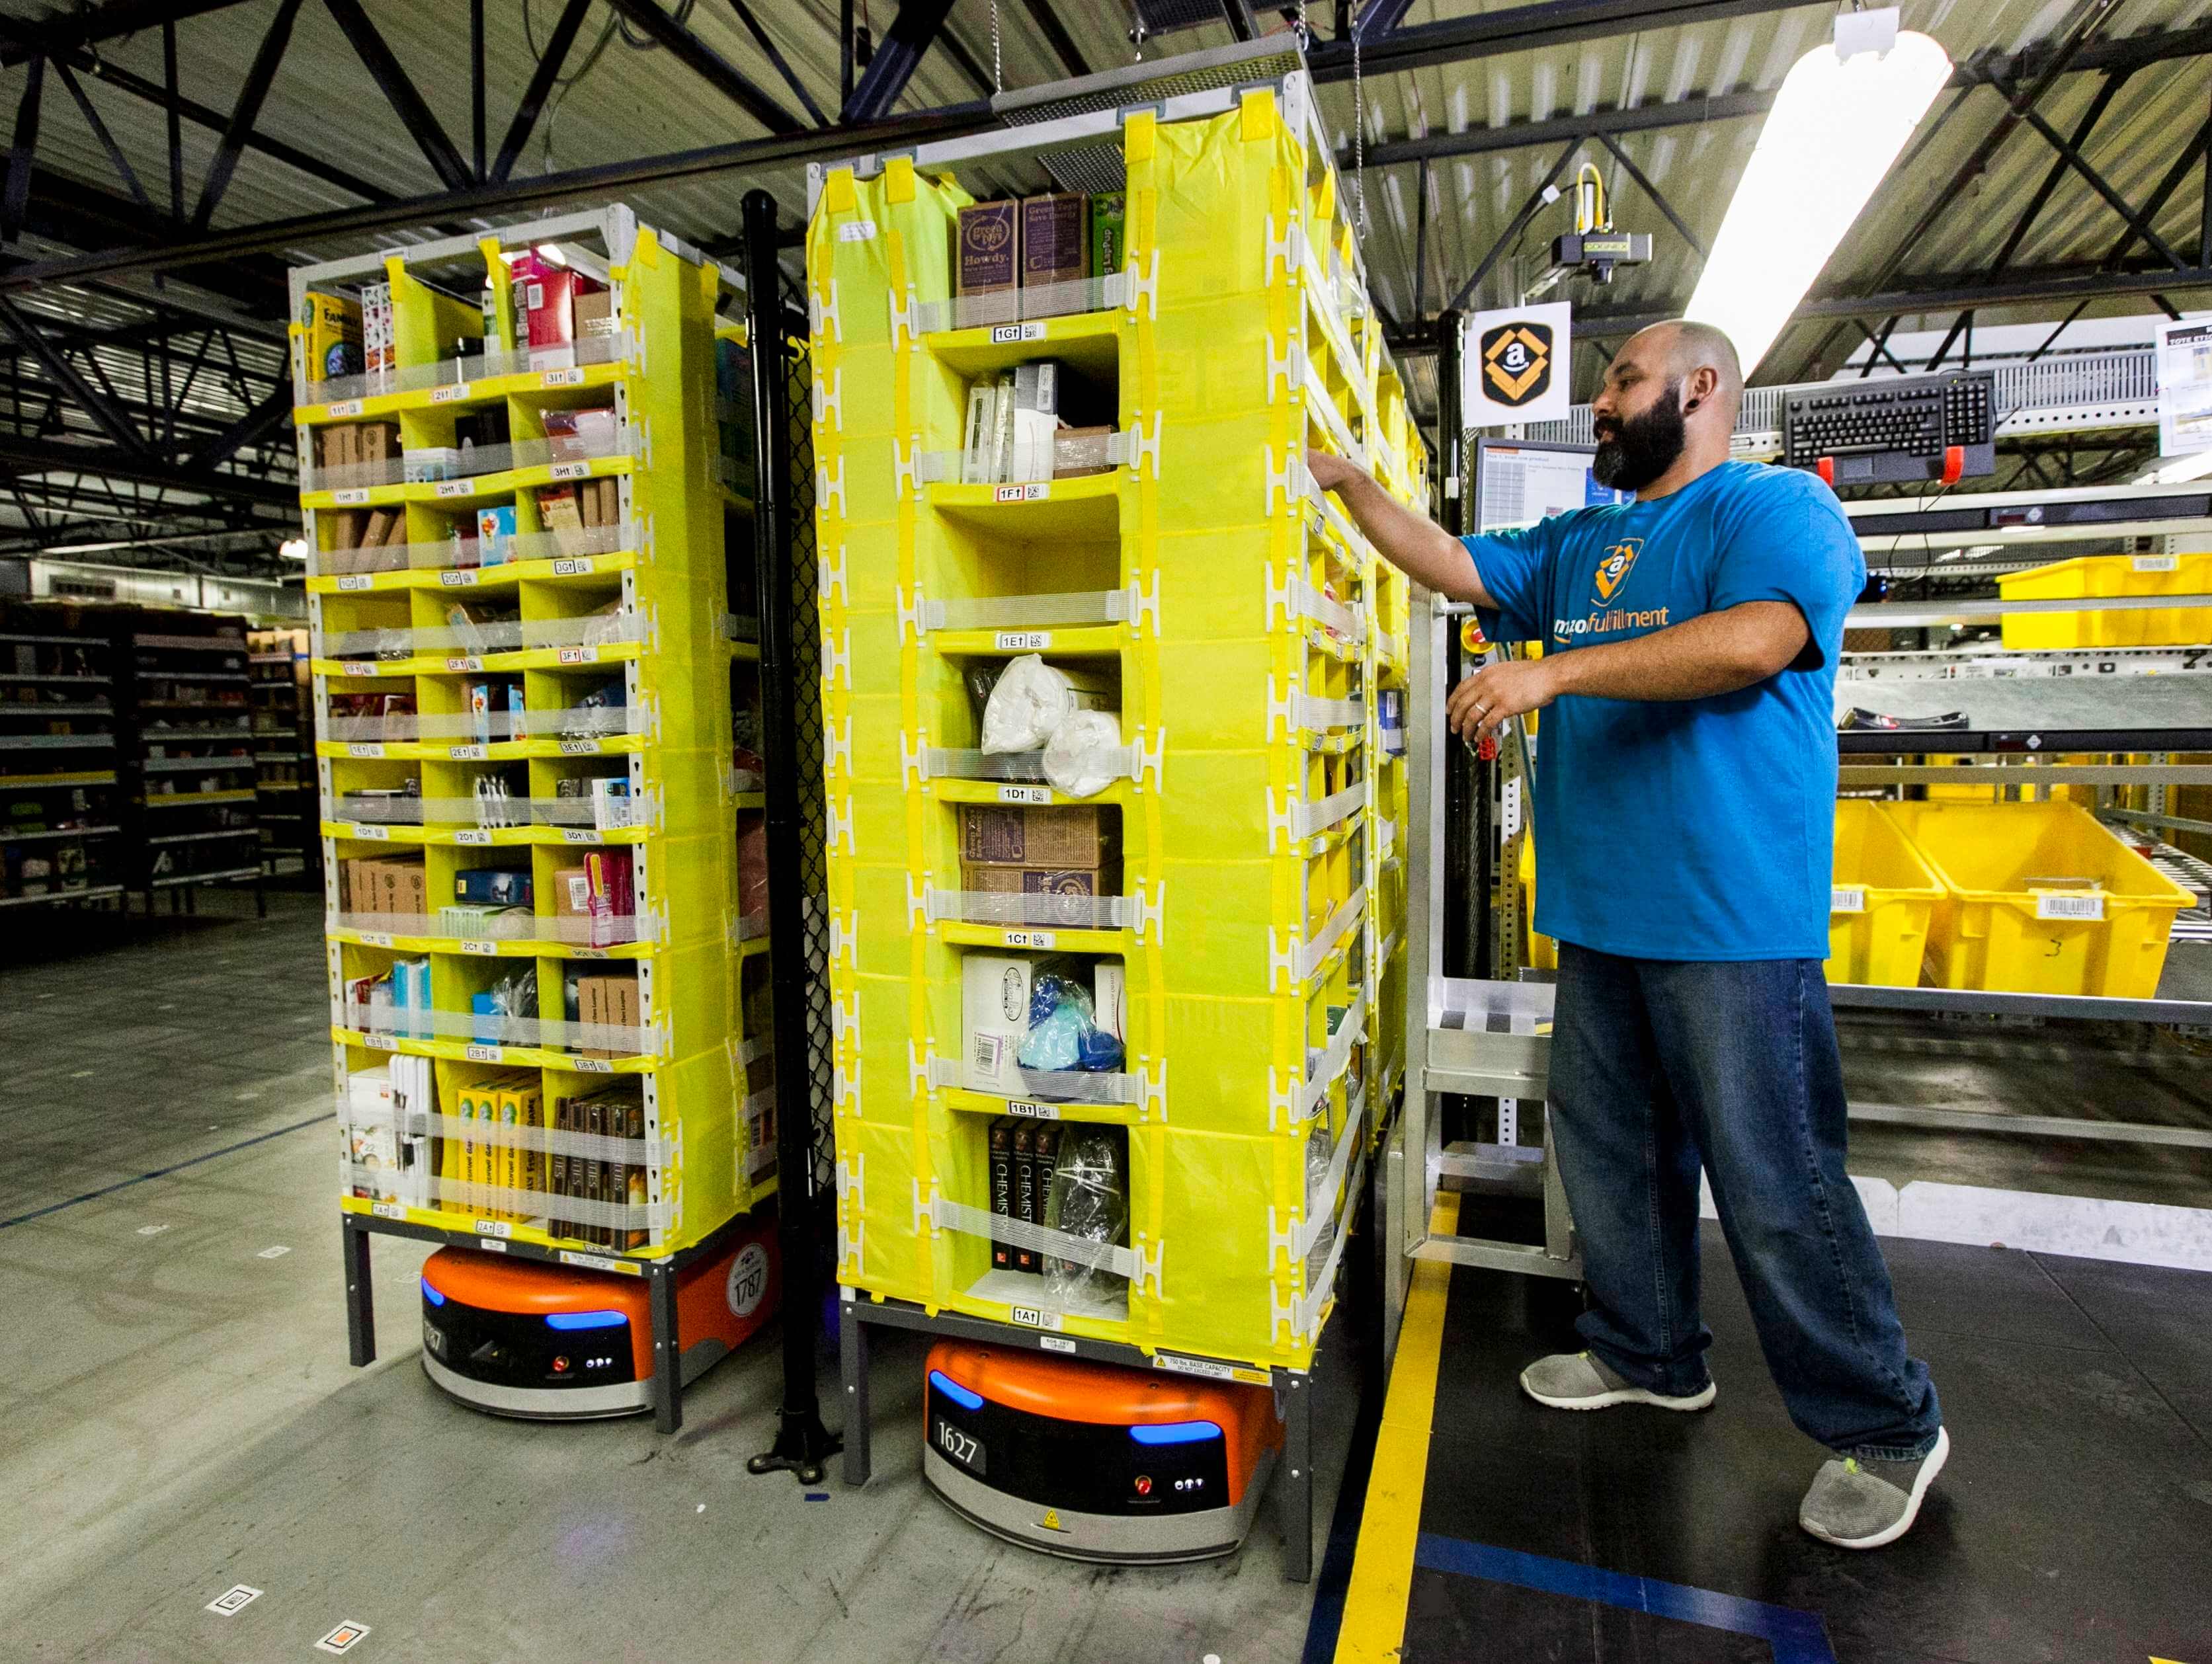 Amazon wants to make working in its warehouses less tedious by turning it into a game